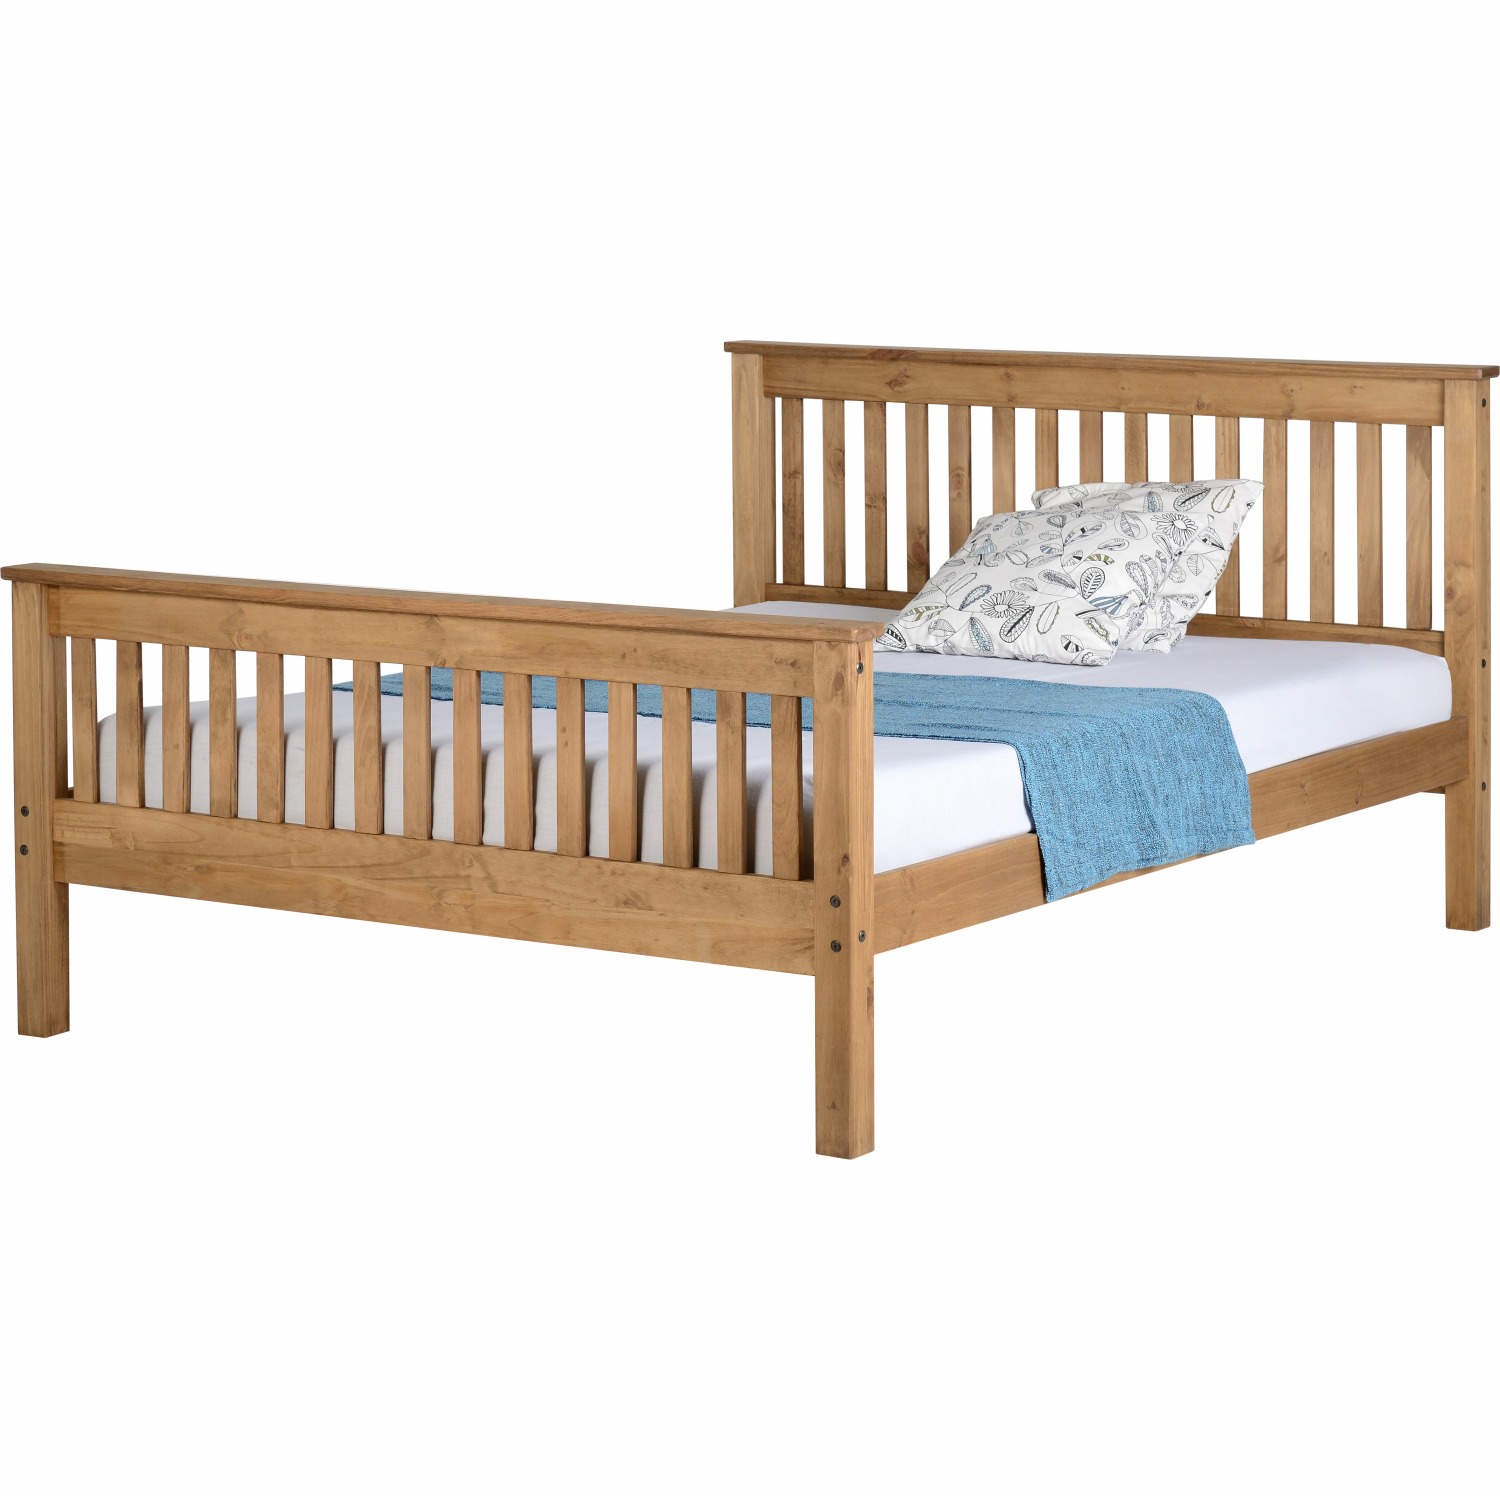 Seconique Monaco King Size Bed Frame In, White Distressed King Size Bed